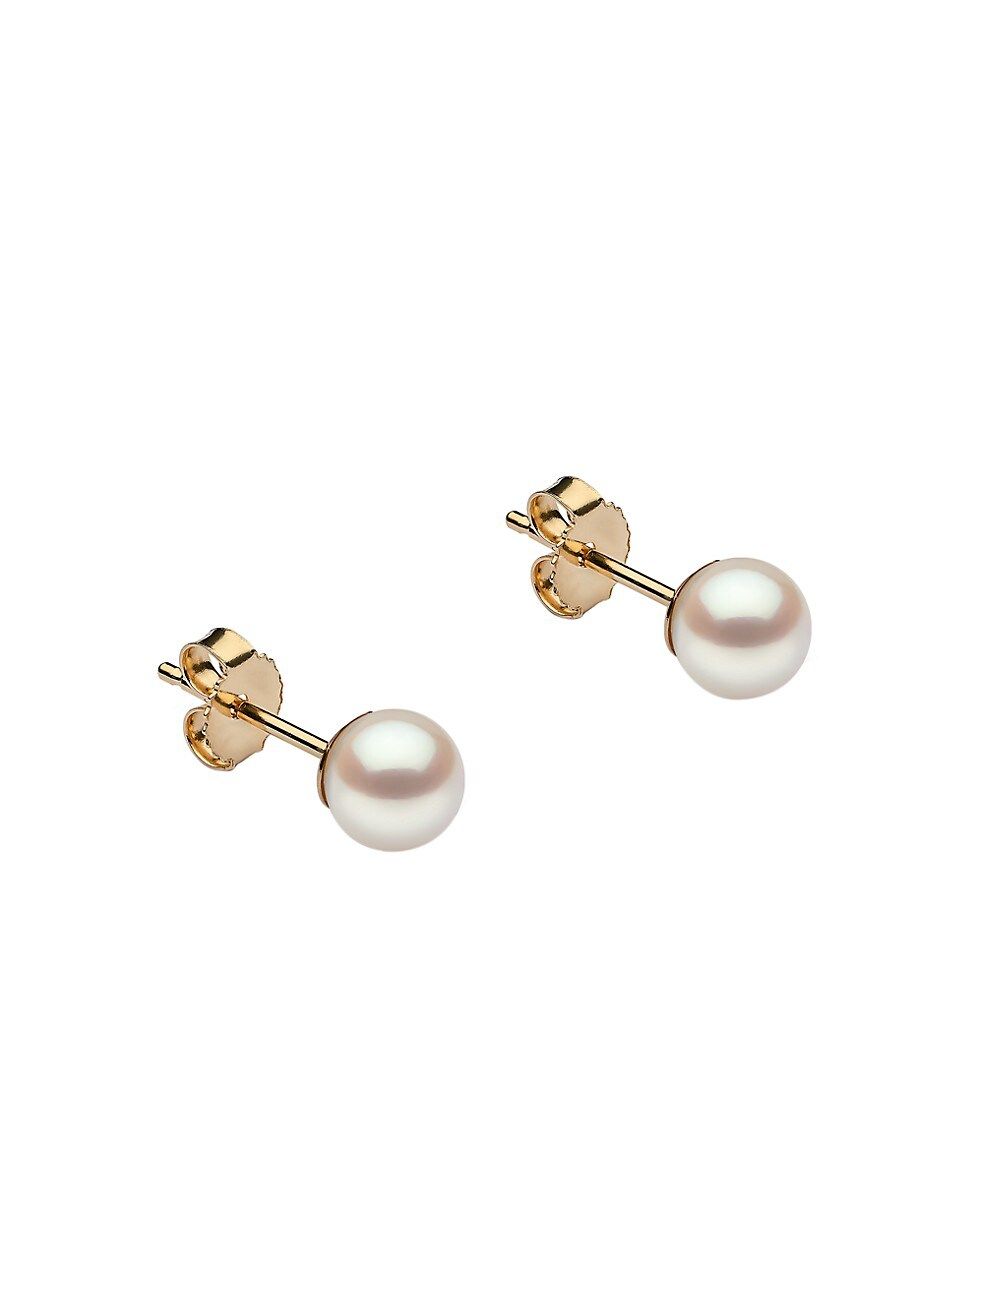 Saks Fifth Avenue Collection 14K Yellow Gold &amp; 6-6.5MM Akoya Pearl Stud Earrings | Saks Fifth Avenue (UK)